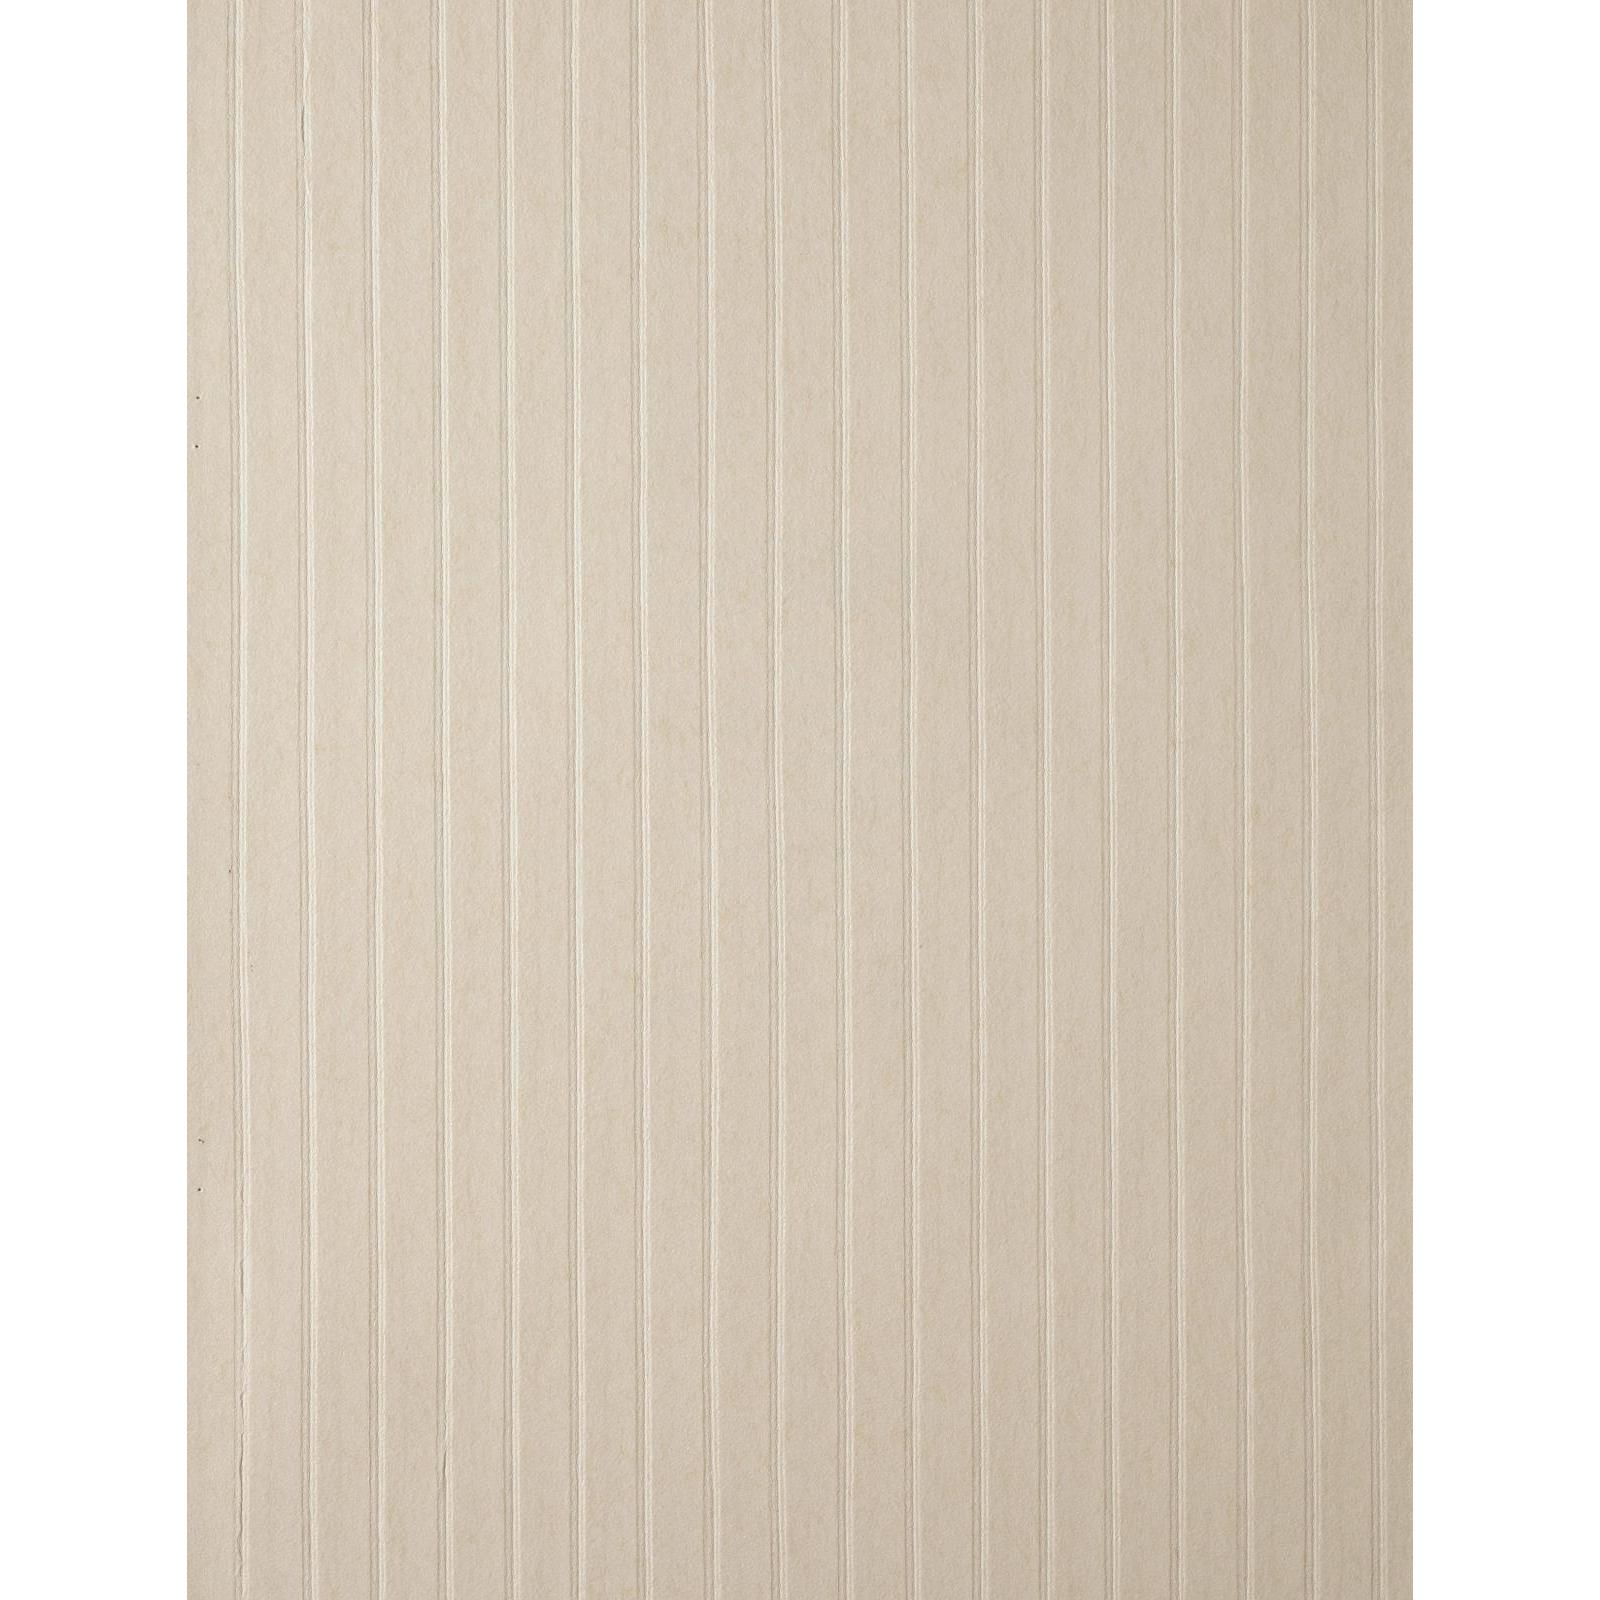 York Wallcoverings Decorative Finishes Wide Wale Corduroy Wallpaper